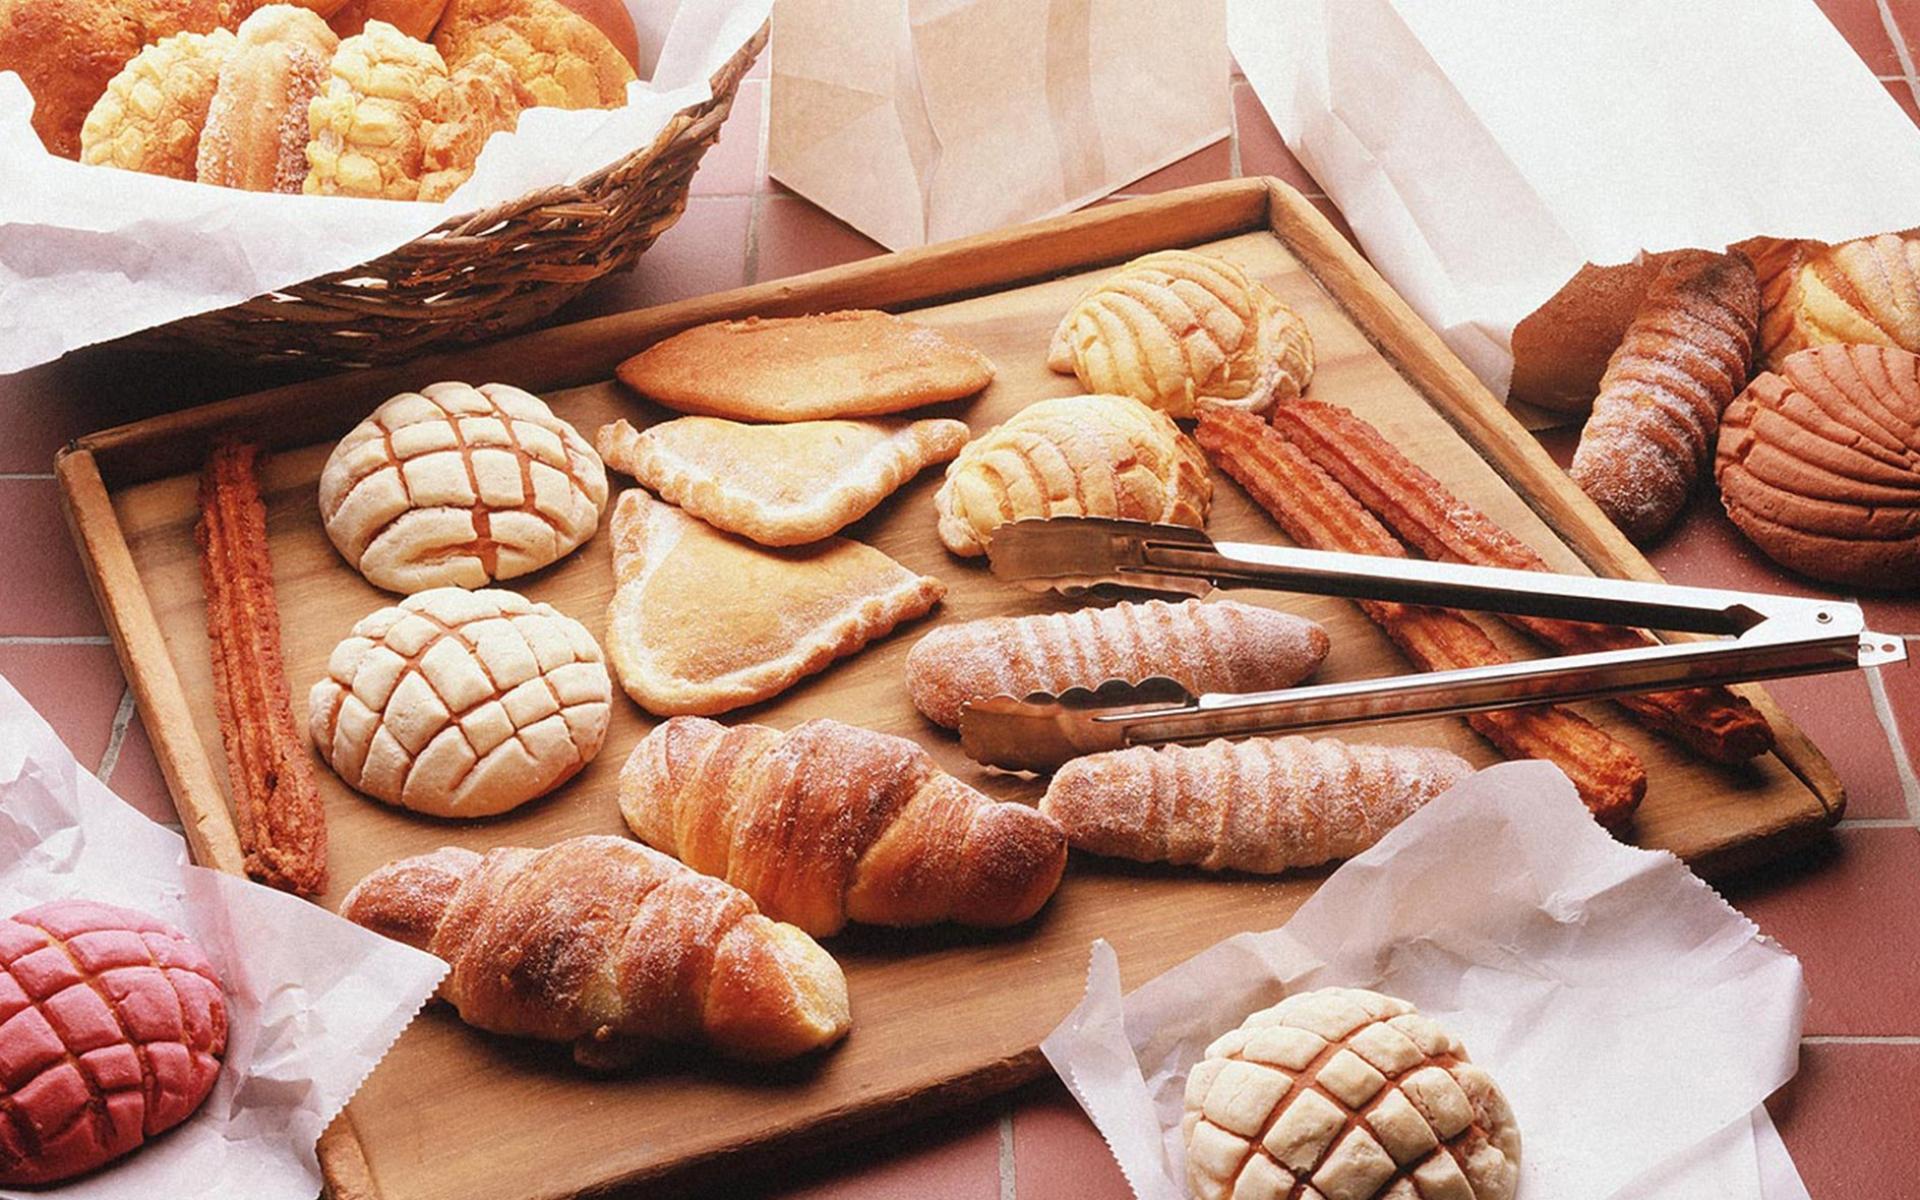 A tray of pastries and breads on display - Bakery